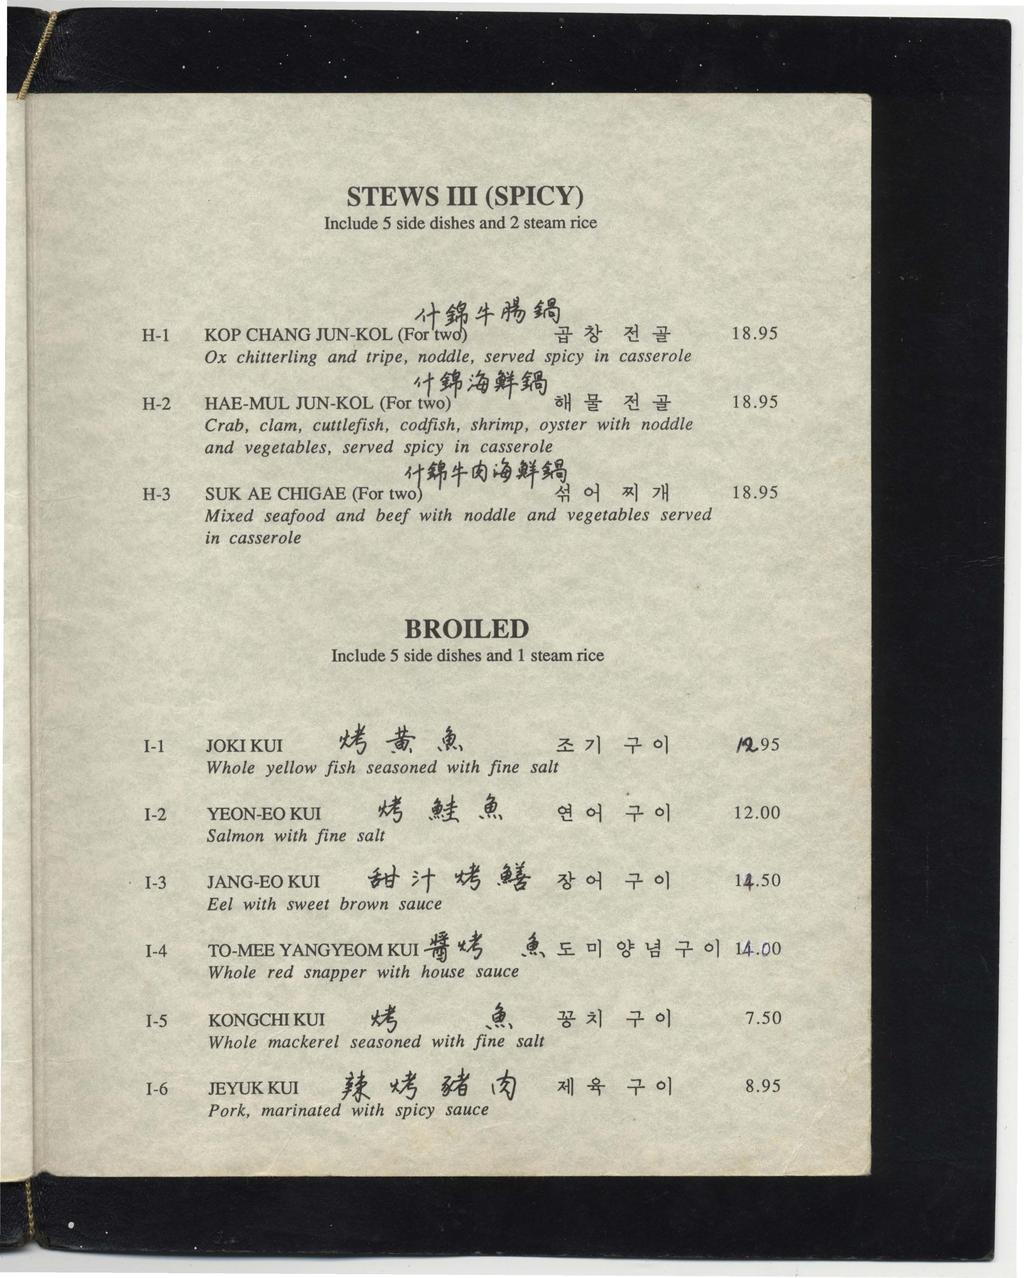 STEWS III (SPICY) Include 5 side dishes and 2 steam rice H-1 H-2 H-3 t 4!i, 4- lr!